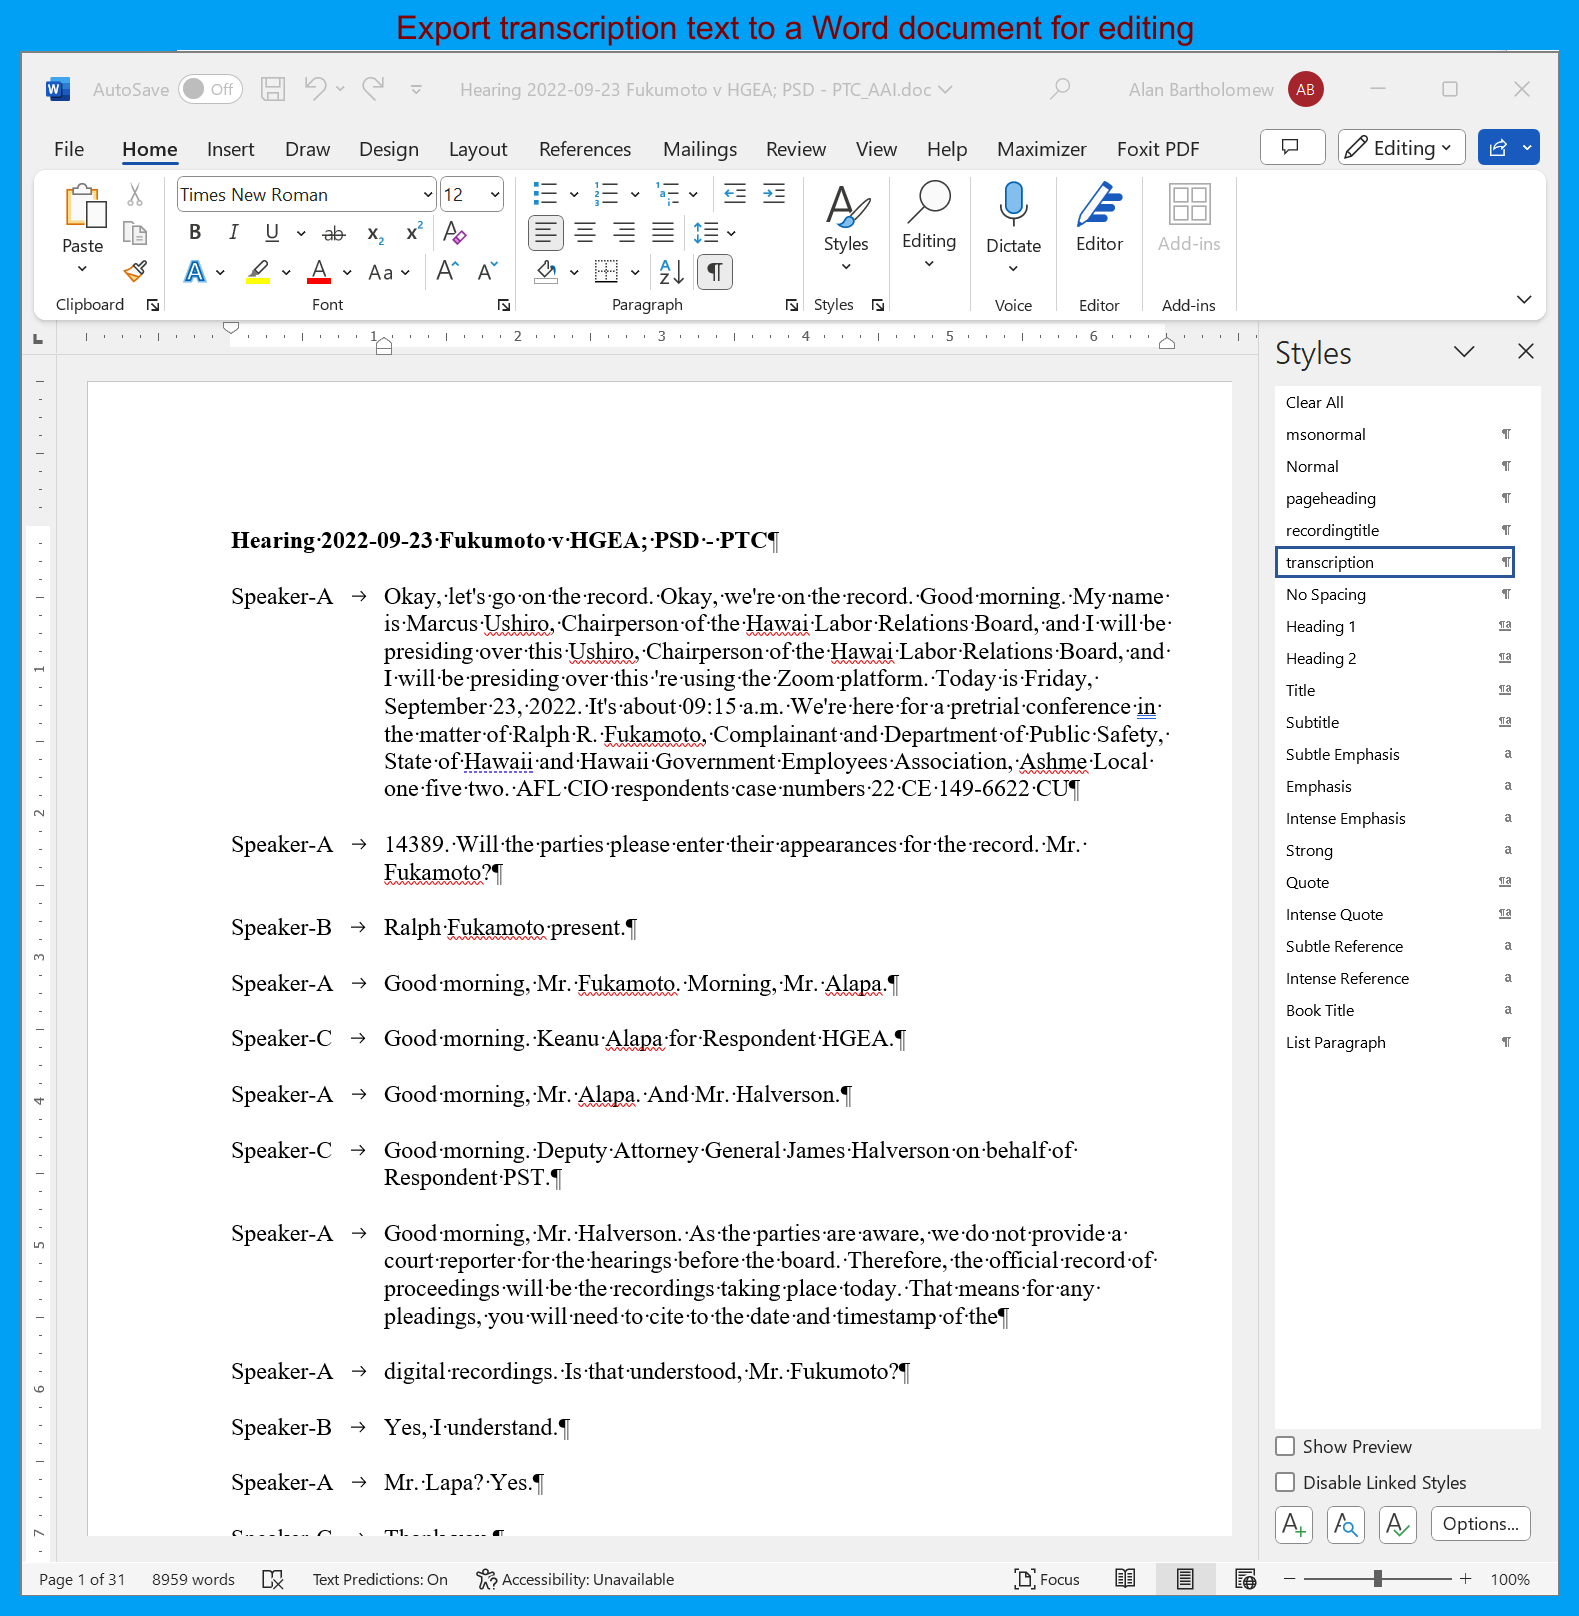 Export transcripiton text to a Word document for editing.